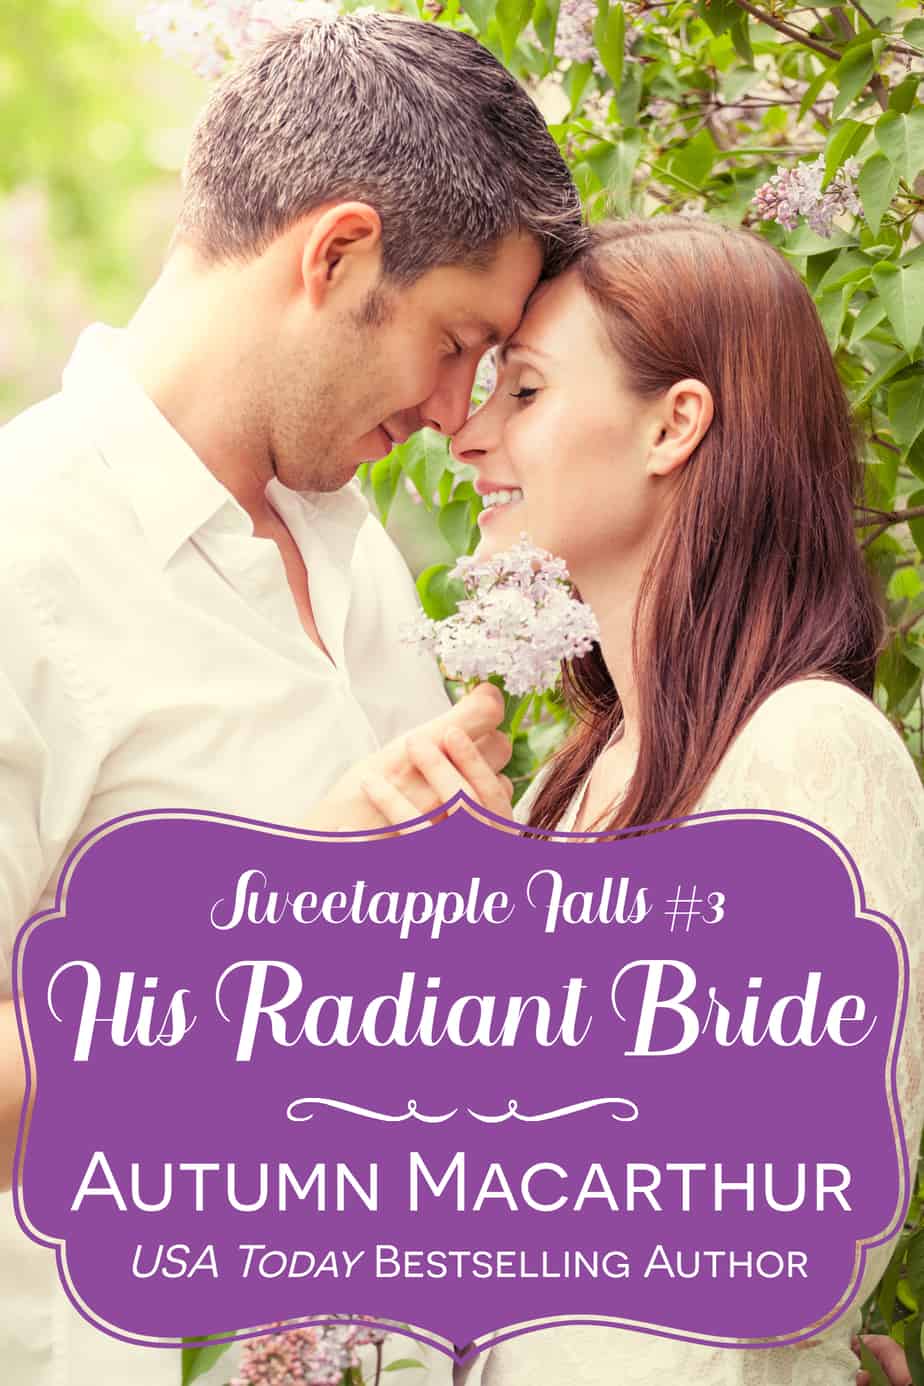 Cover image for His Radiant Bride, book 3 in the Sweetapple Falls small-town Christian romance series